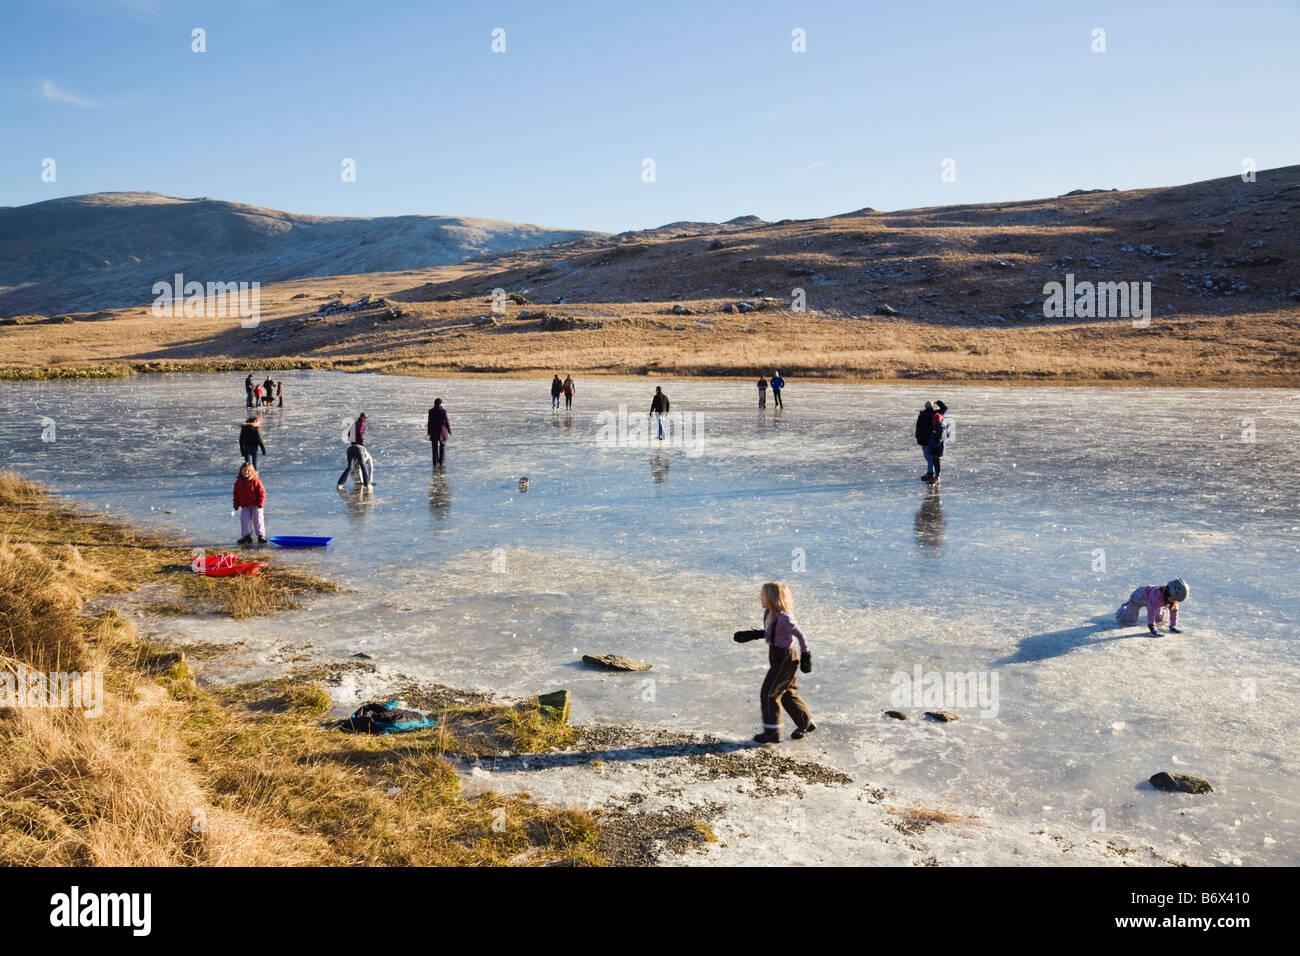 Lockwoods Lake Pen-y-Gwryd Snowdonia National Park North Wales UK People playing on frozen lake ice in winter Stock Photo